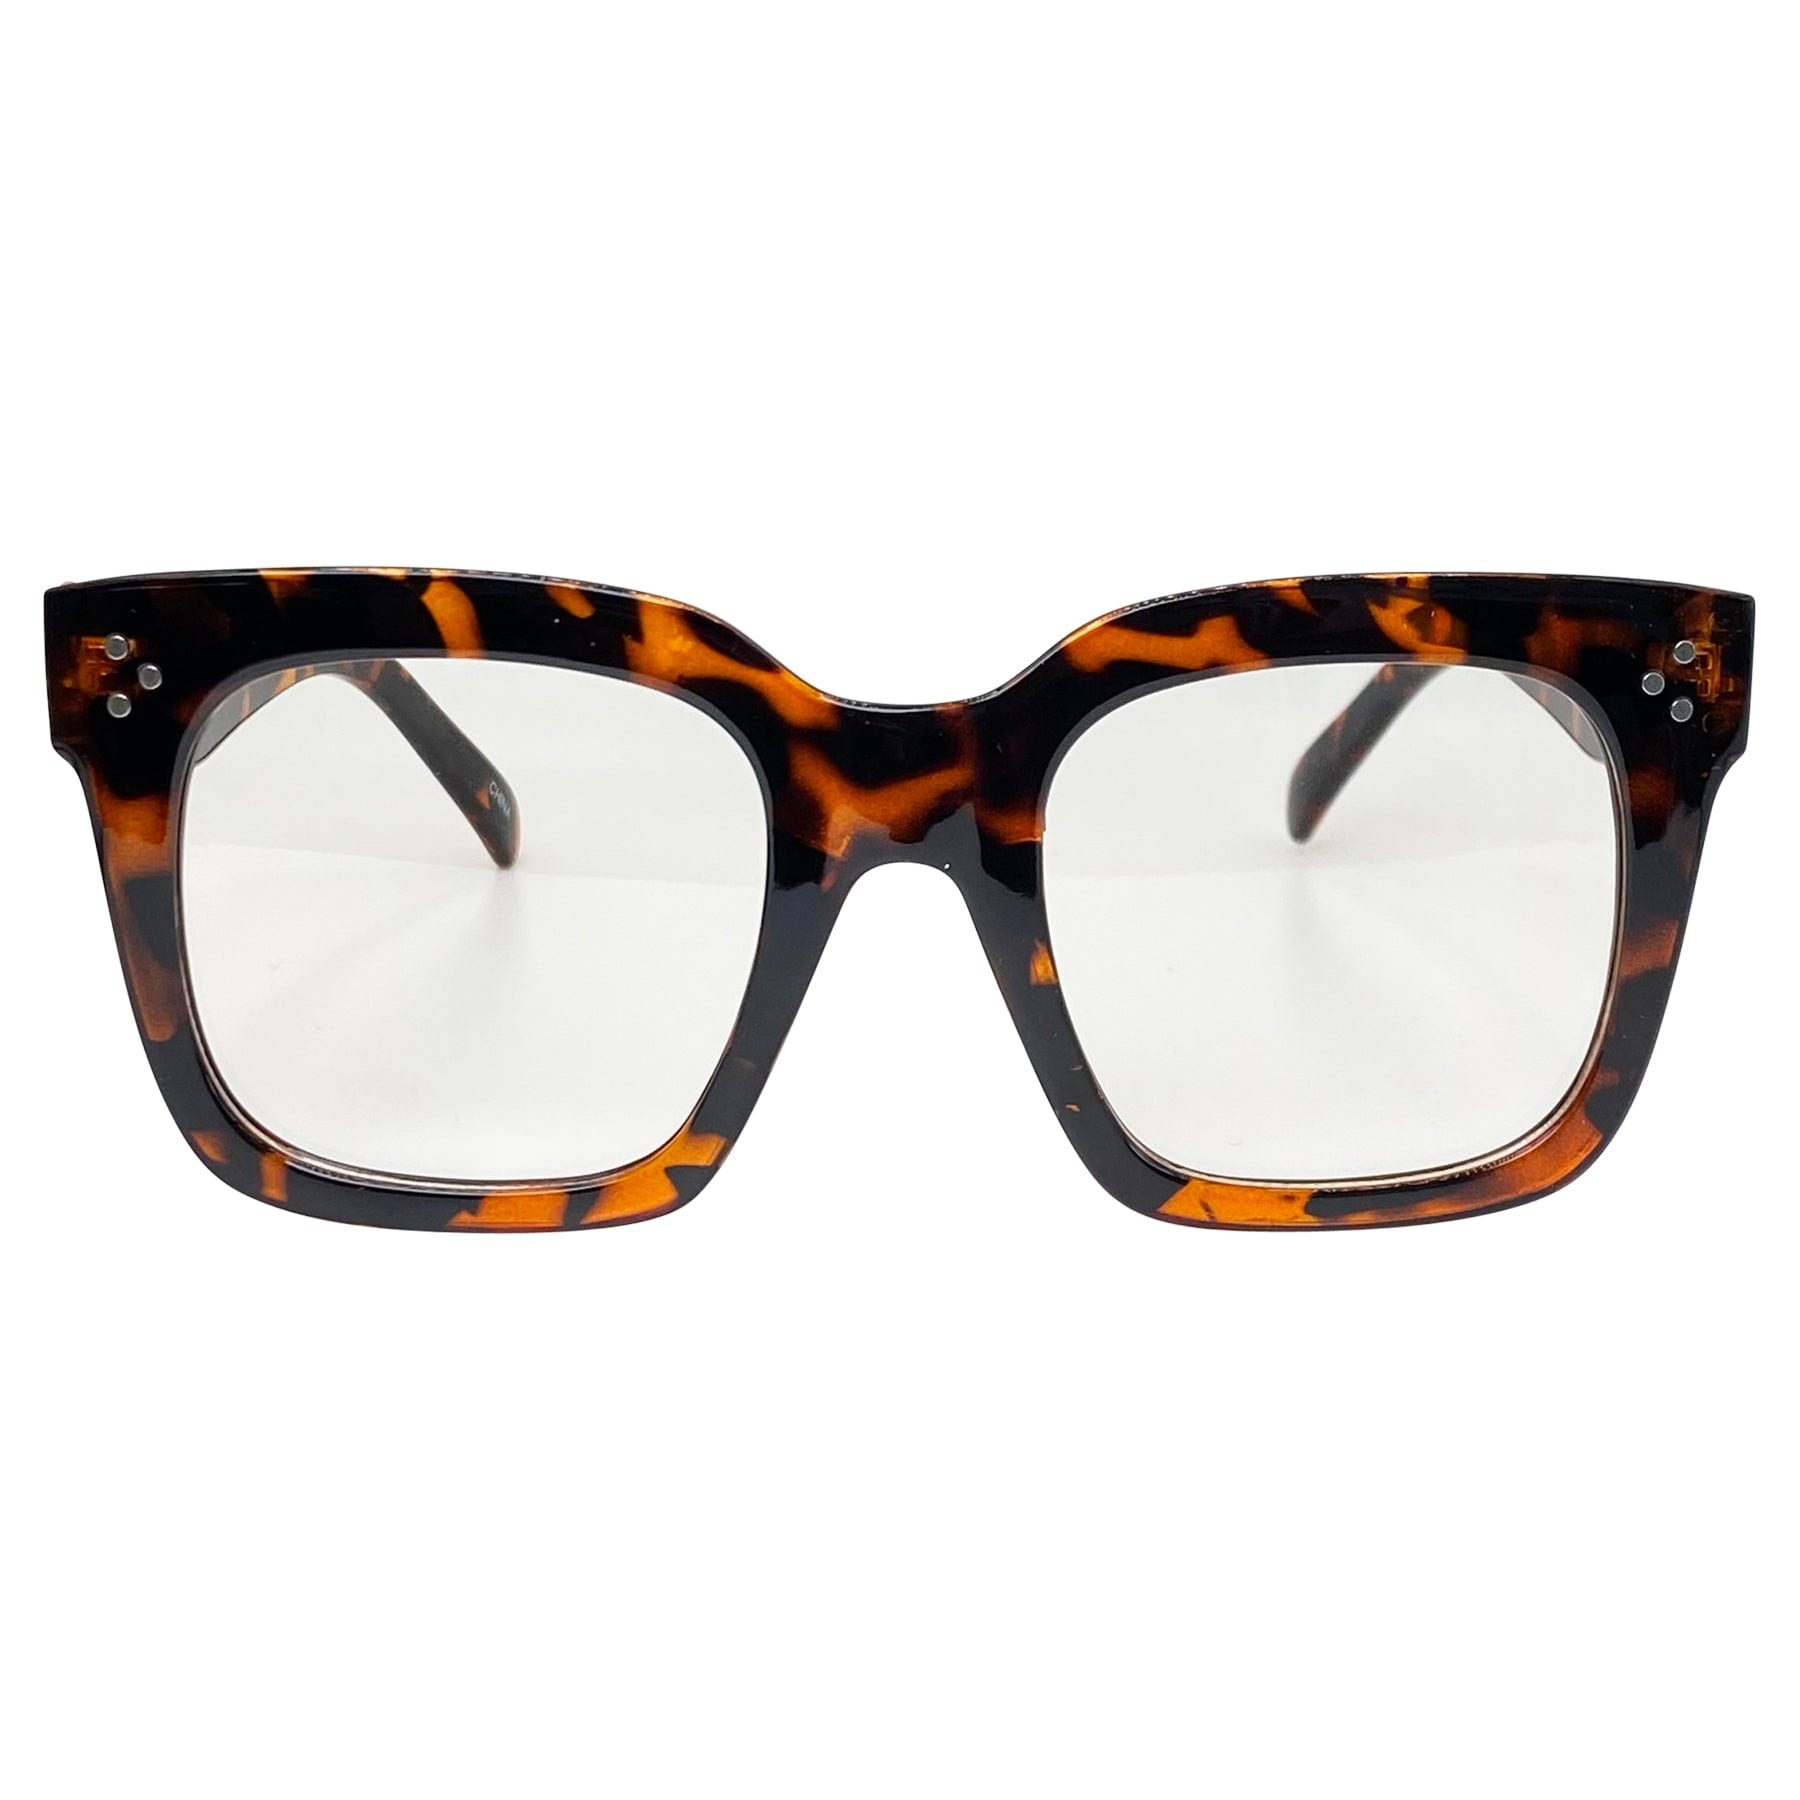 tortoise color glasses with a chunky square frame and clear lens